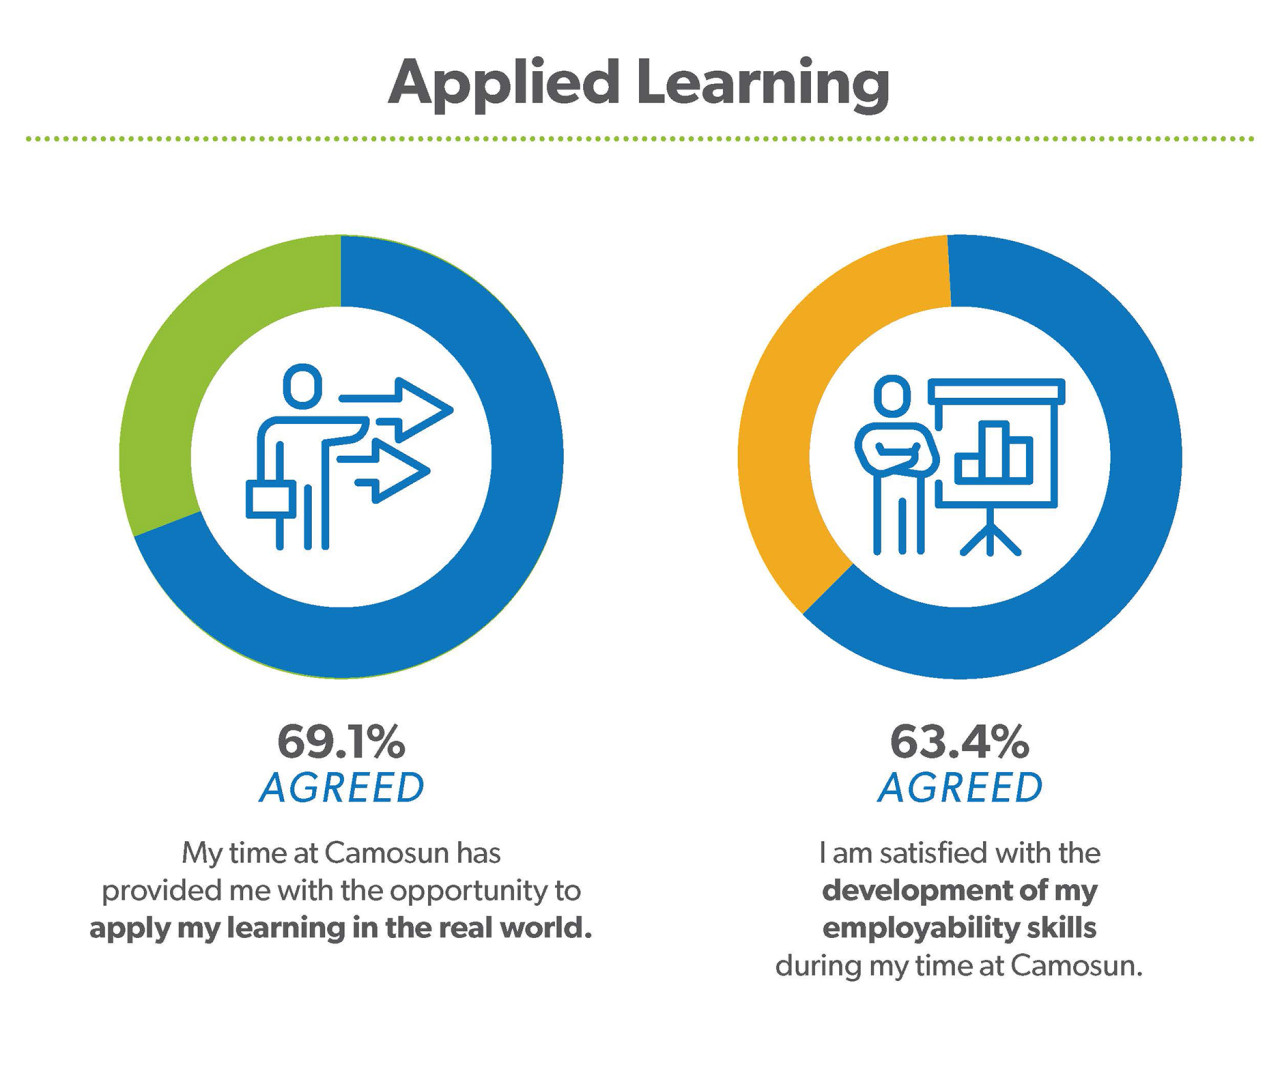 61% of students agreed that their time at Camosun provided them with the opportunity to apply their learning in the real world. 